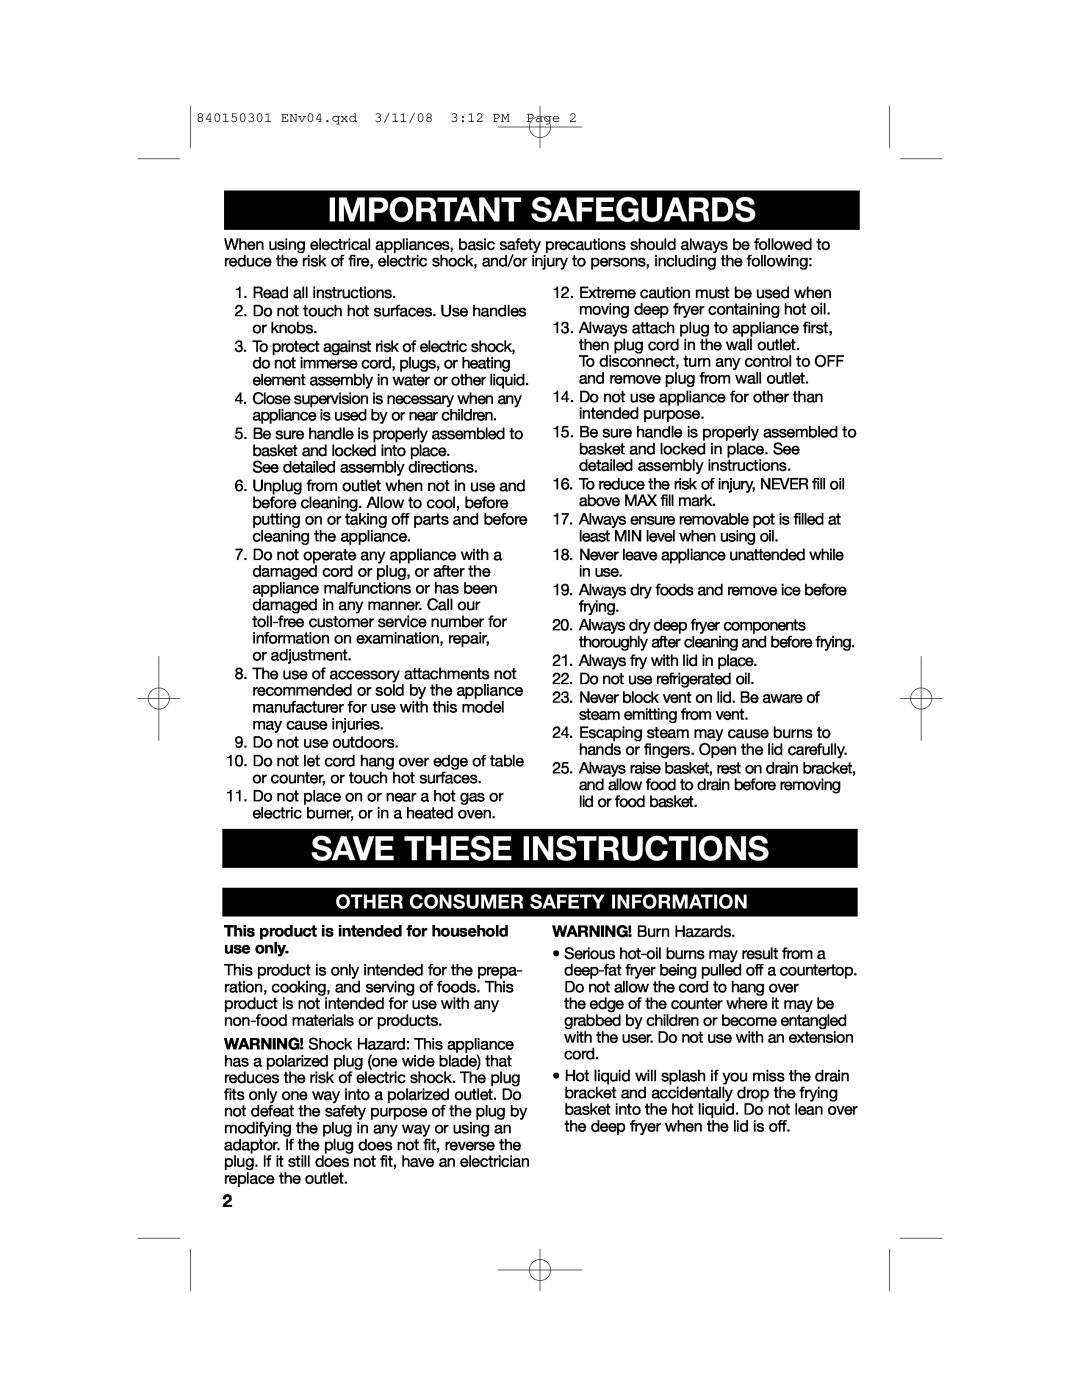 Hamilton Beach 35030C manual Important Safeguards, Save These Instructions, Other Consumer Safety Information 